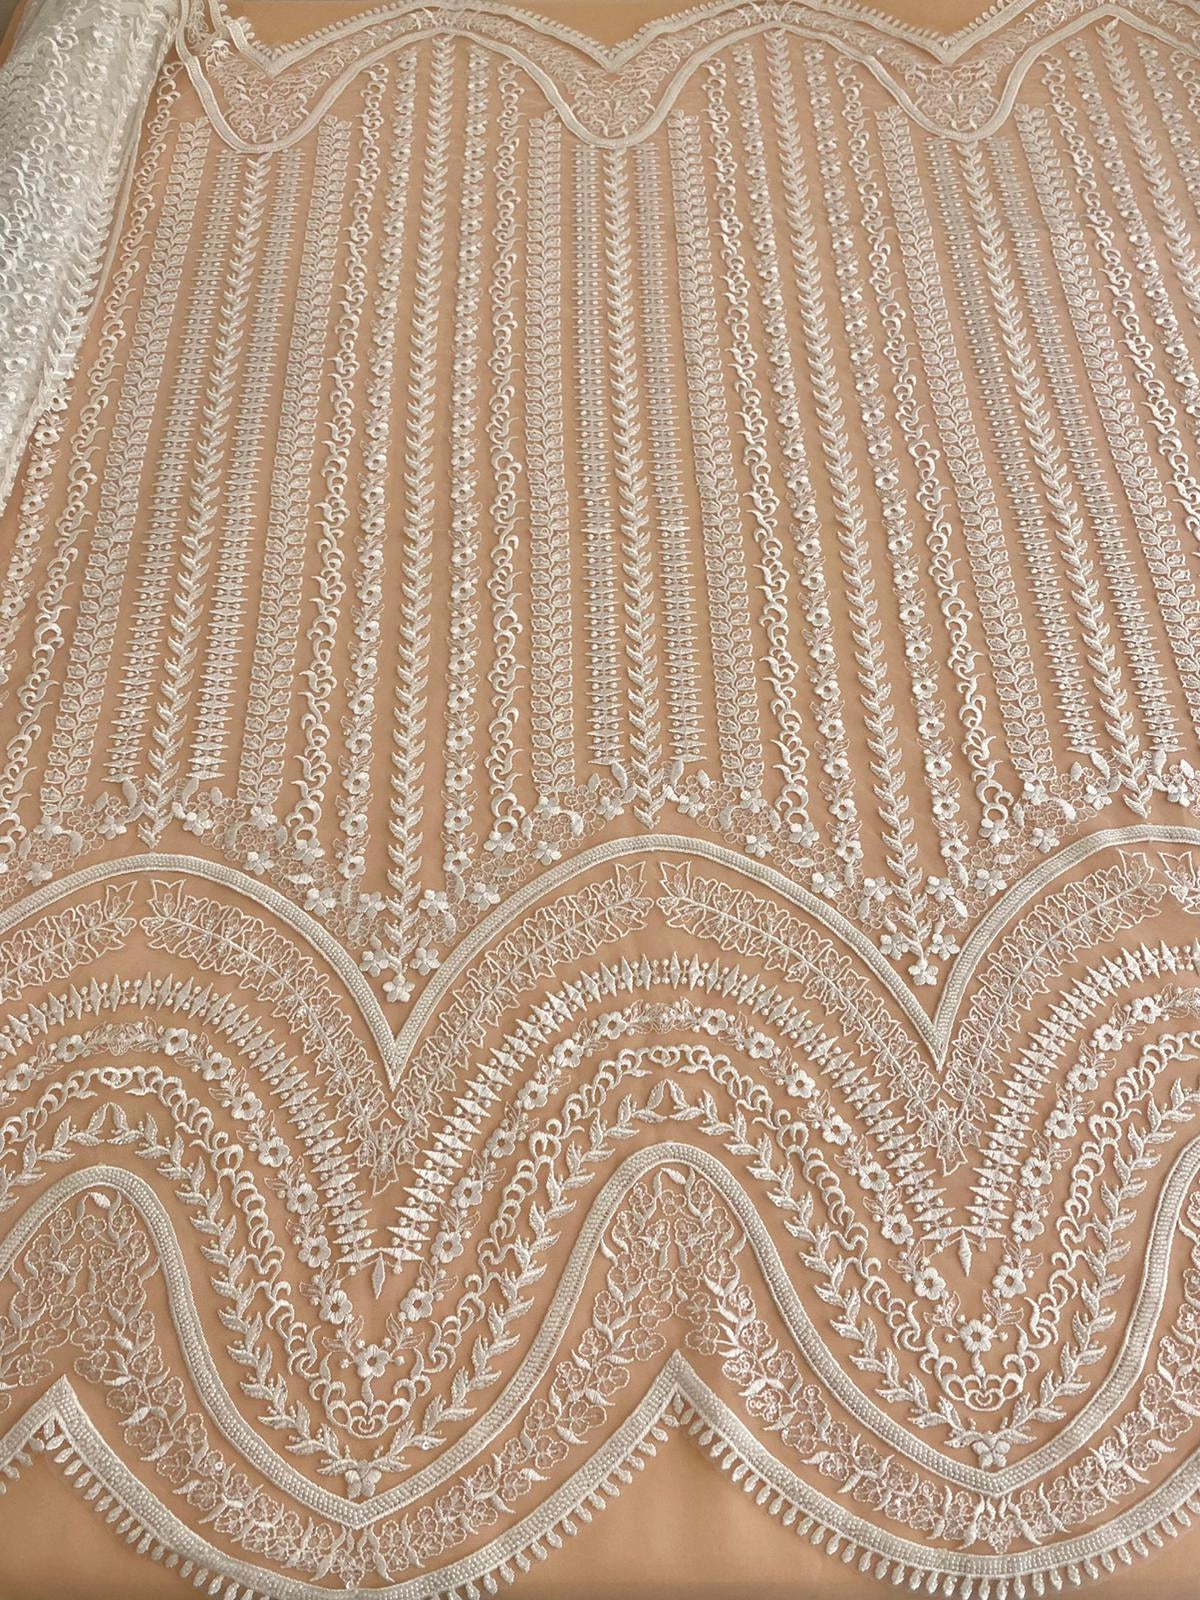 Lace with Geometric Pattern, with Pearls and Sequins